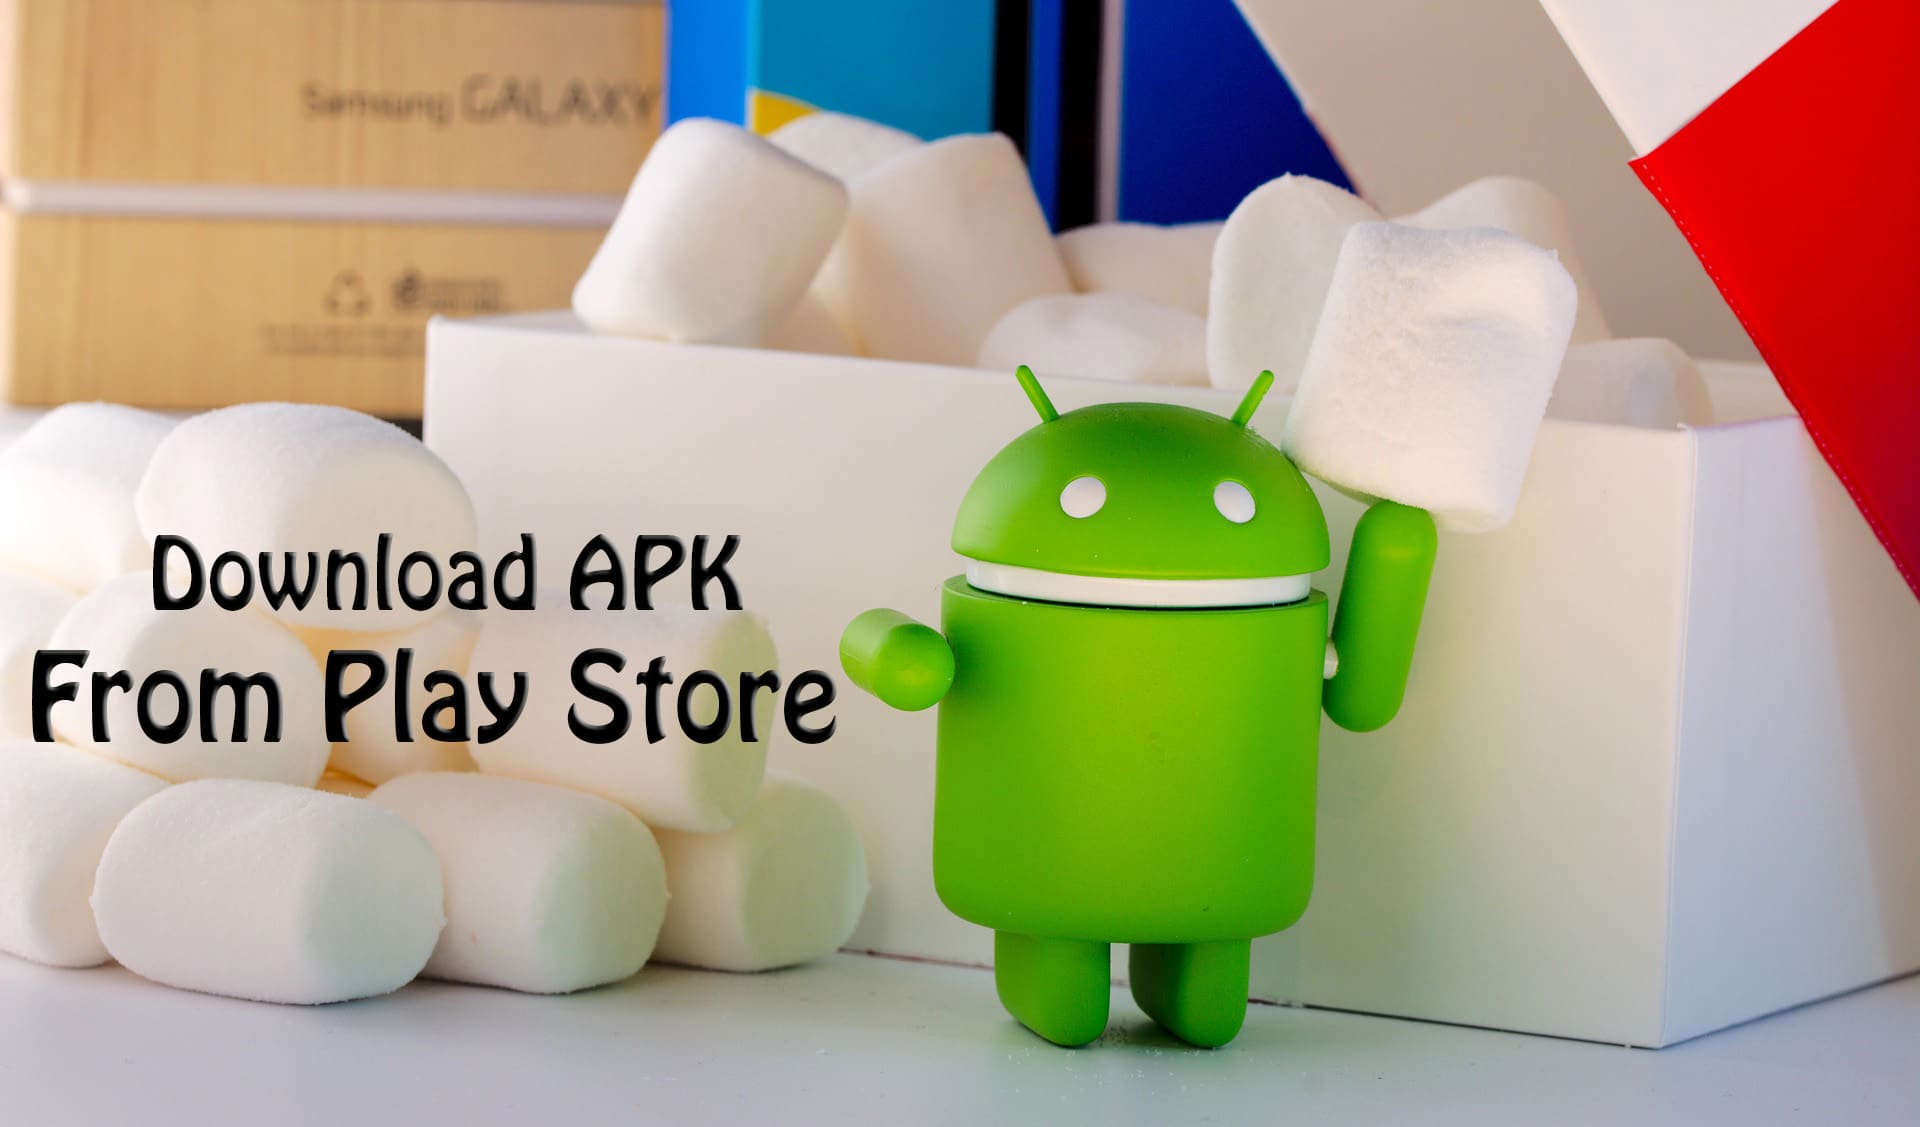 can you download apps from play store to pc and then to phone